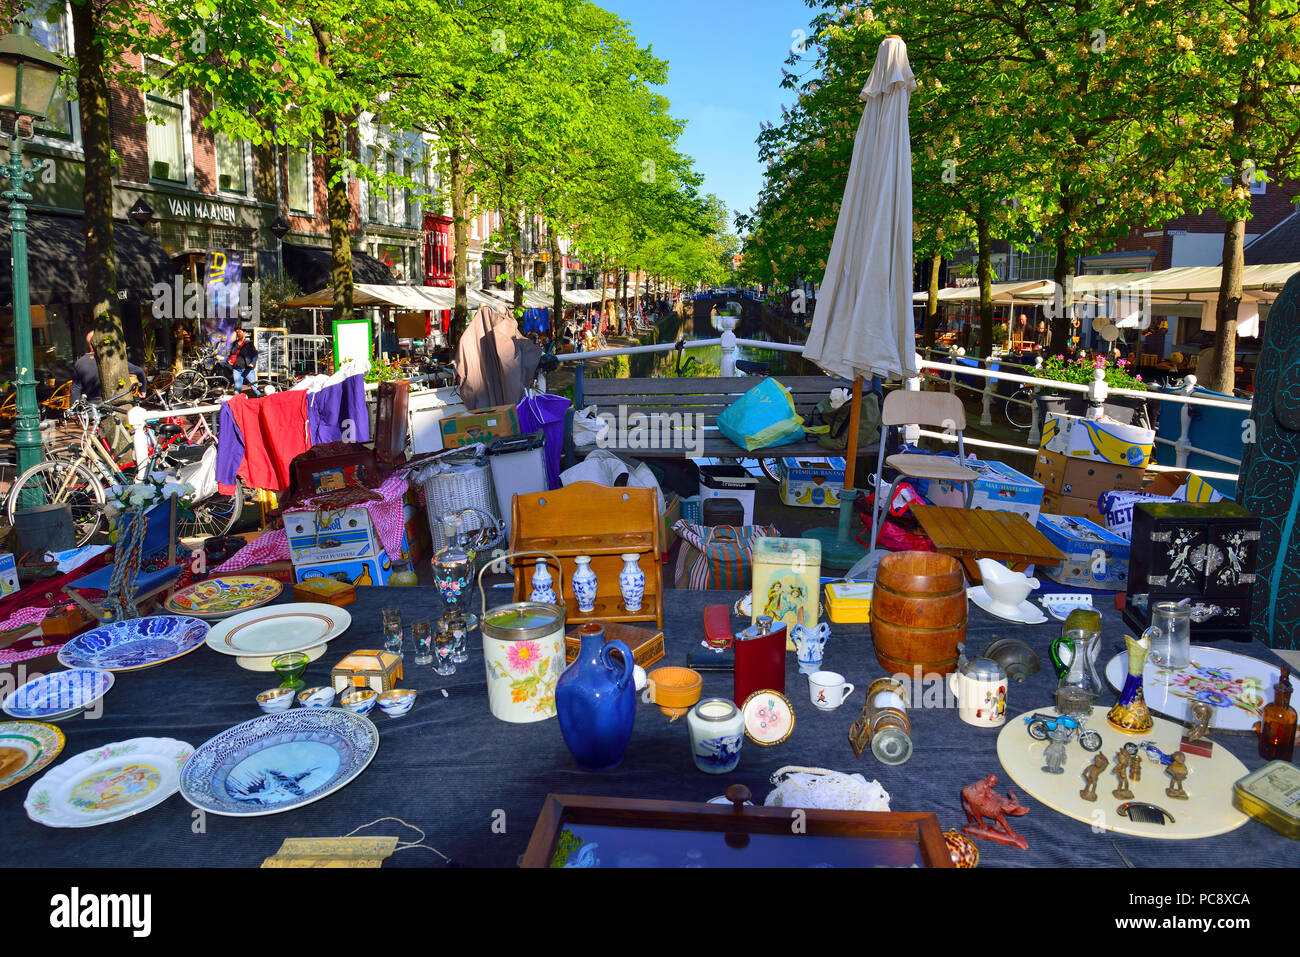 The famous outdoor street market in Delft which lines the canalside ...